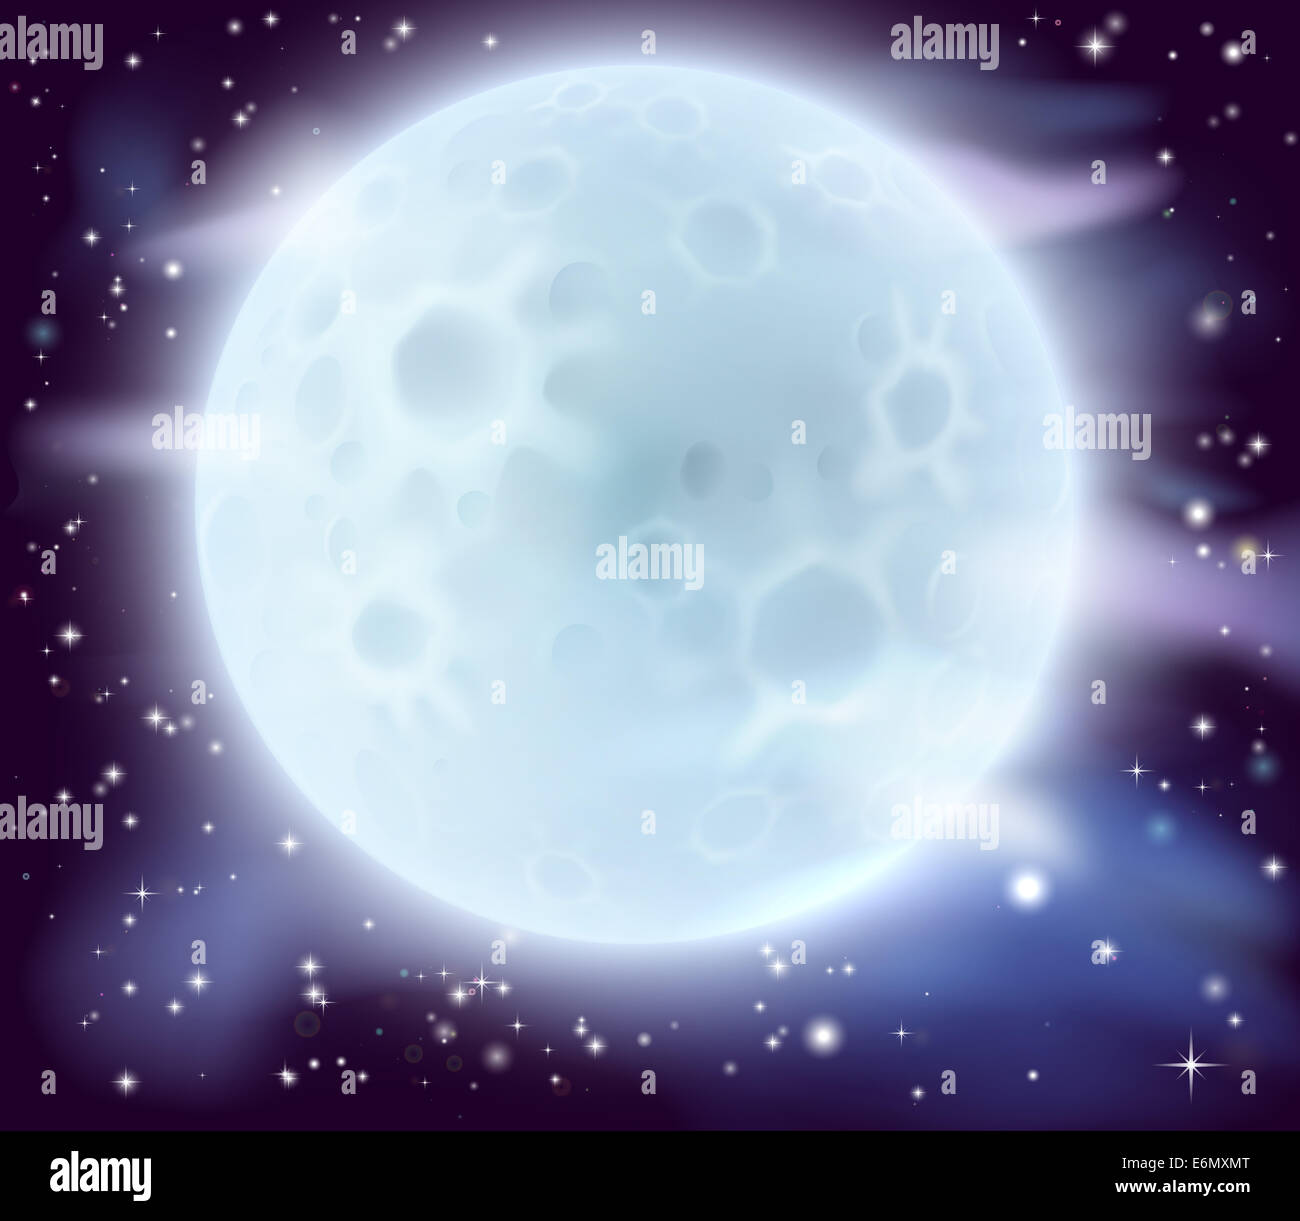 A cartoon illustration of a large glowing full moon Stock Photo